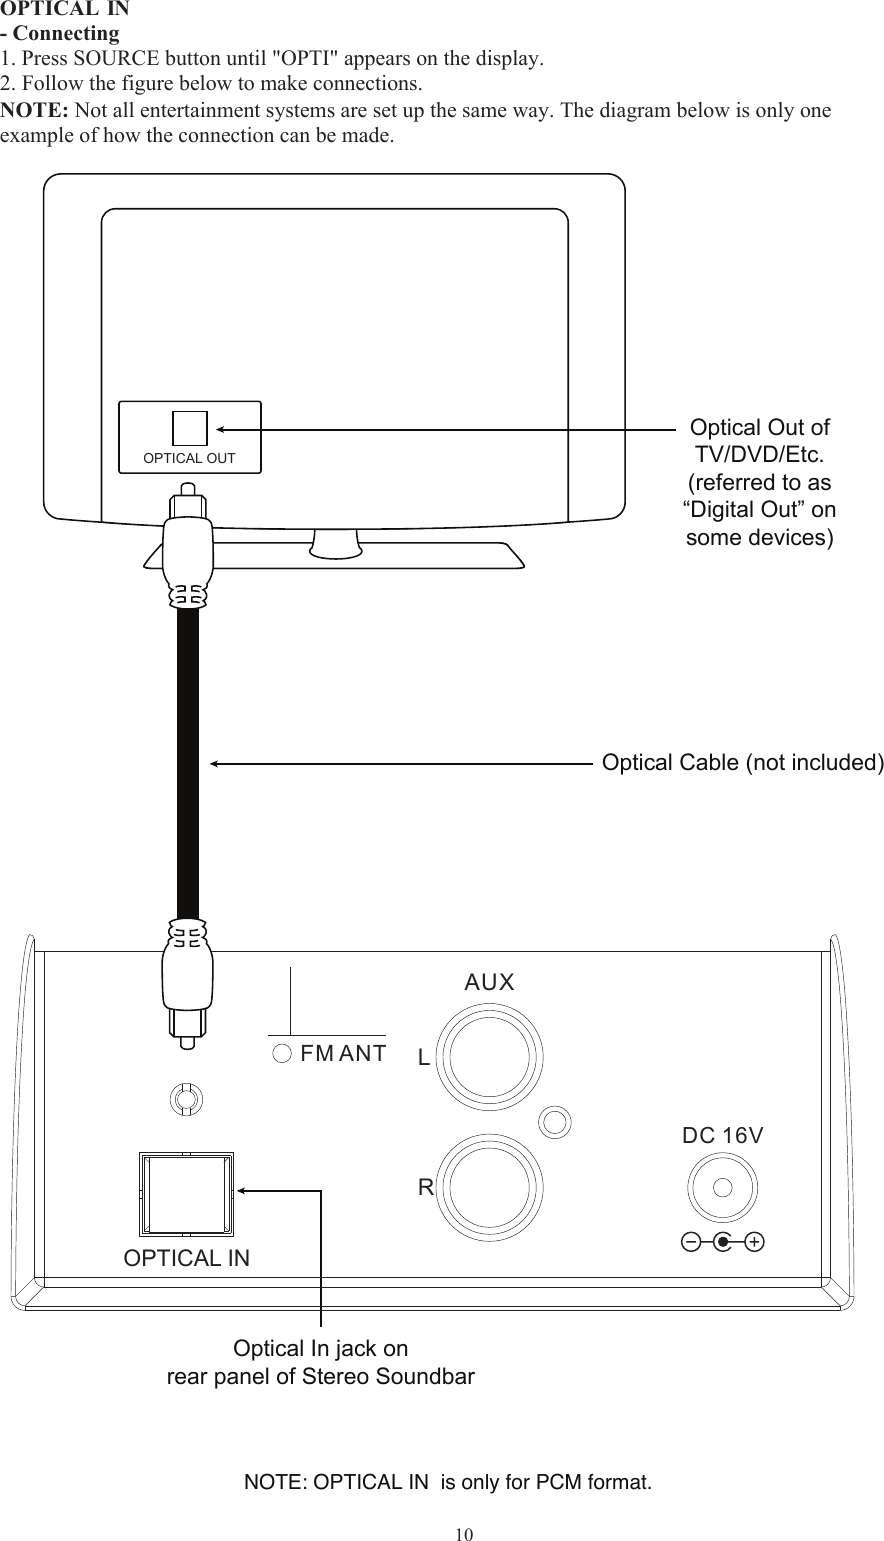   10  OPTICAL  IN - Connecting 1. Press SOURCE button until &quot;OPTI&quot; appears on the display.2.NOTE: Not all entertainment systems are set up the same way. The diagram below is only oneexample of how the connection can be made. Follow the figure below to make connections.                     Optical Out ofTV/DVD/Etc.(referred to as“Digital Out” onsome devices)Optical Cable (not included)OPTICAL OUTOptical In jack onrear panel of Stereo SoundbarAUX FM ANTDC 16VOPTICAL INLRNOTE: OPTICAL IN  is only for PCM format.